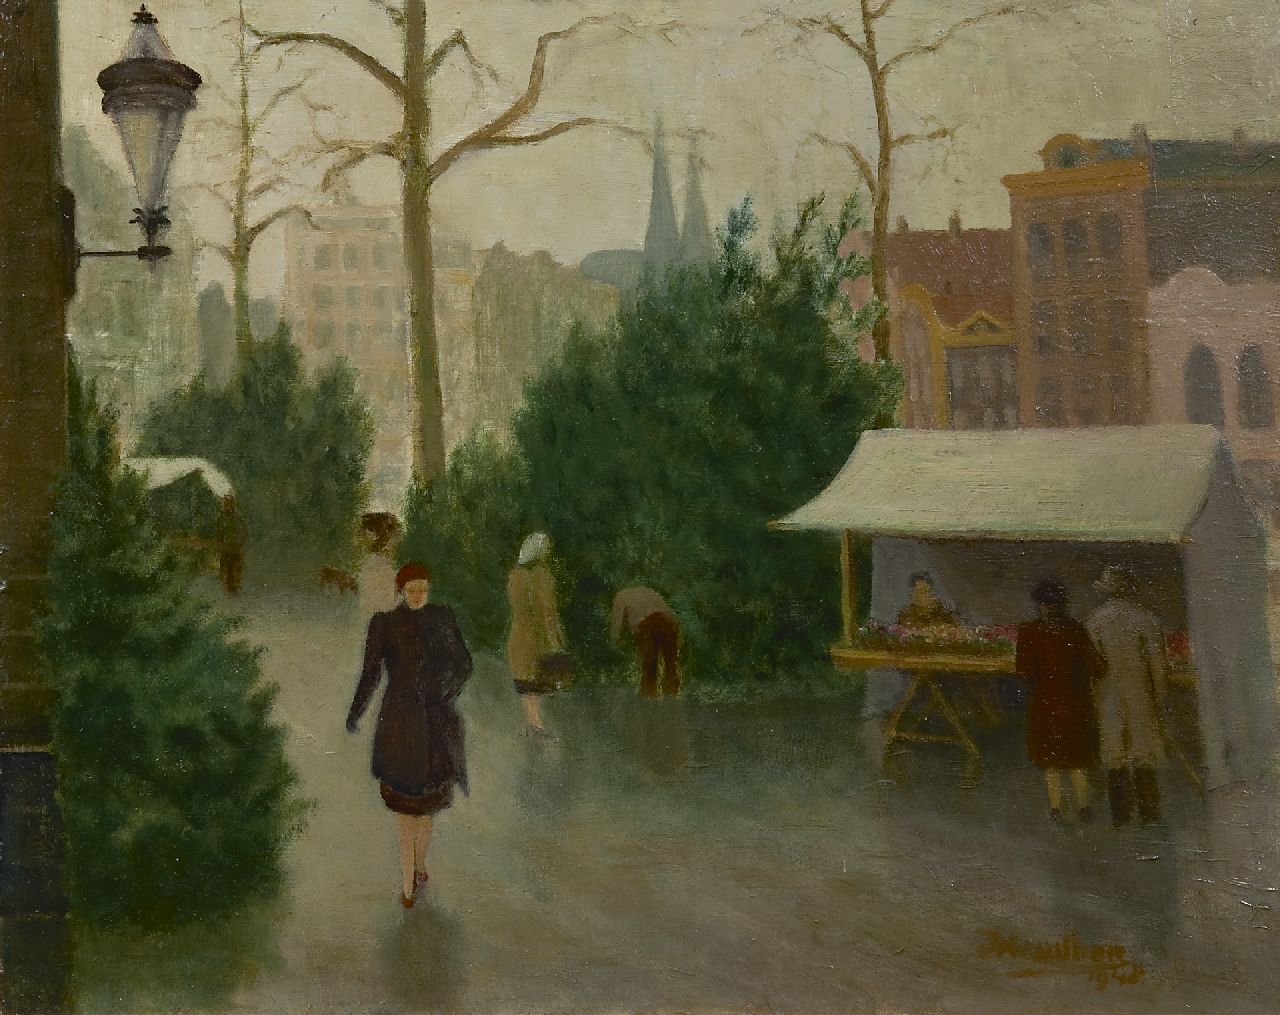 Houillier J.J.  | Jan Jacob Houillier, Street with figures, oil on board 40.3 x 50.4 cm, signed l.r. and dated 1948